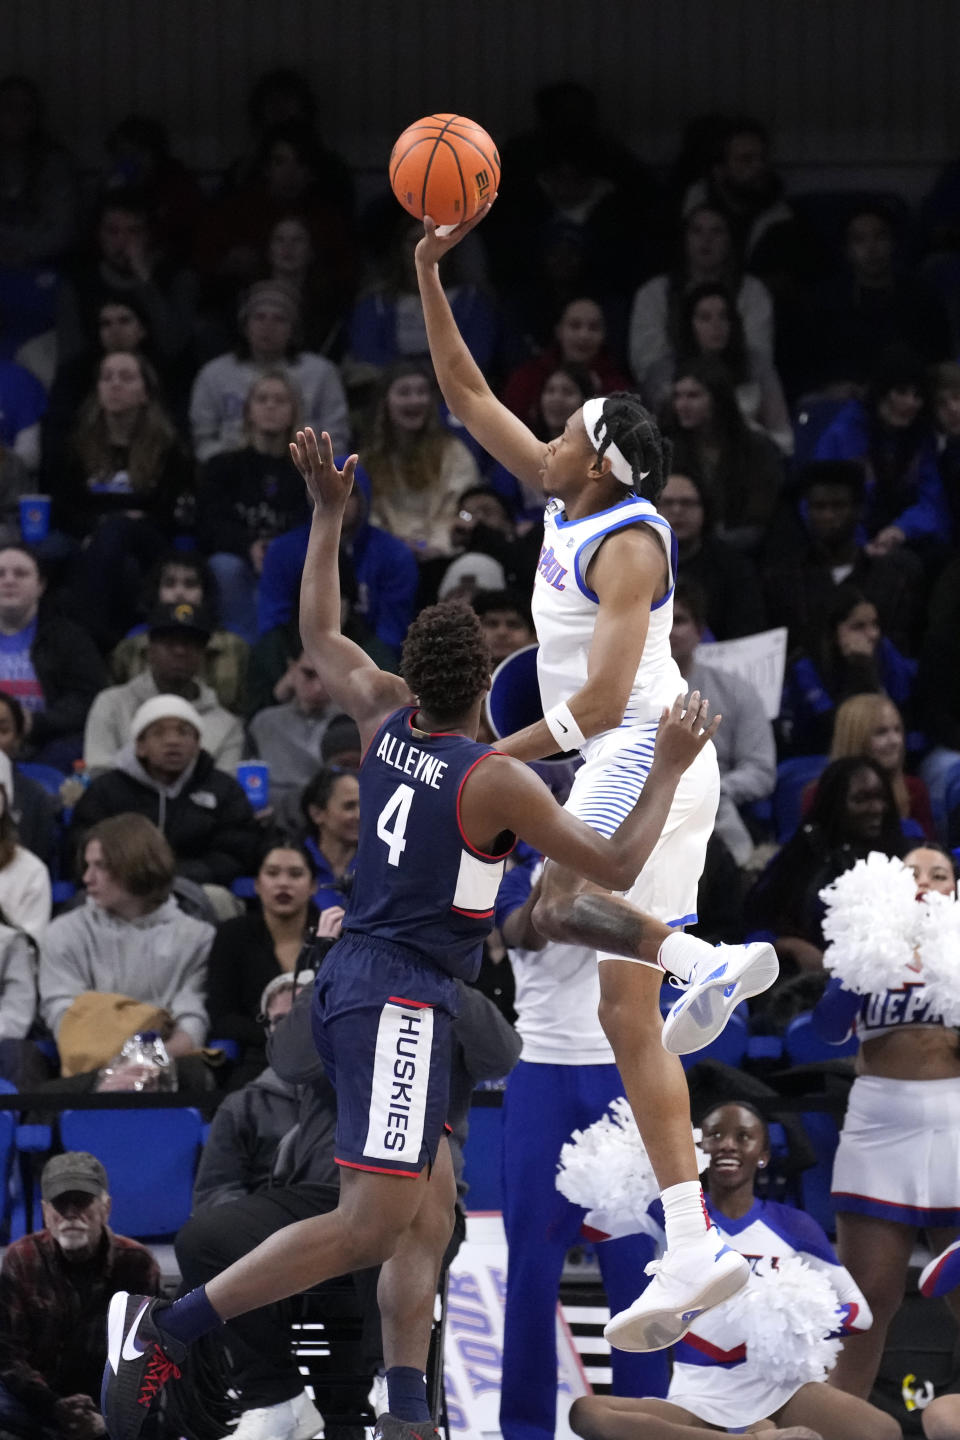 DePaul's Javan Johnson scores over Connecticut's Nahiem Alleyne during the first half of an NCAA college basketball game Tuesday, Jan. 31, 2023, in Chicago. (AP Photo/Charles Rex Arbogast)